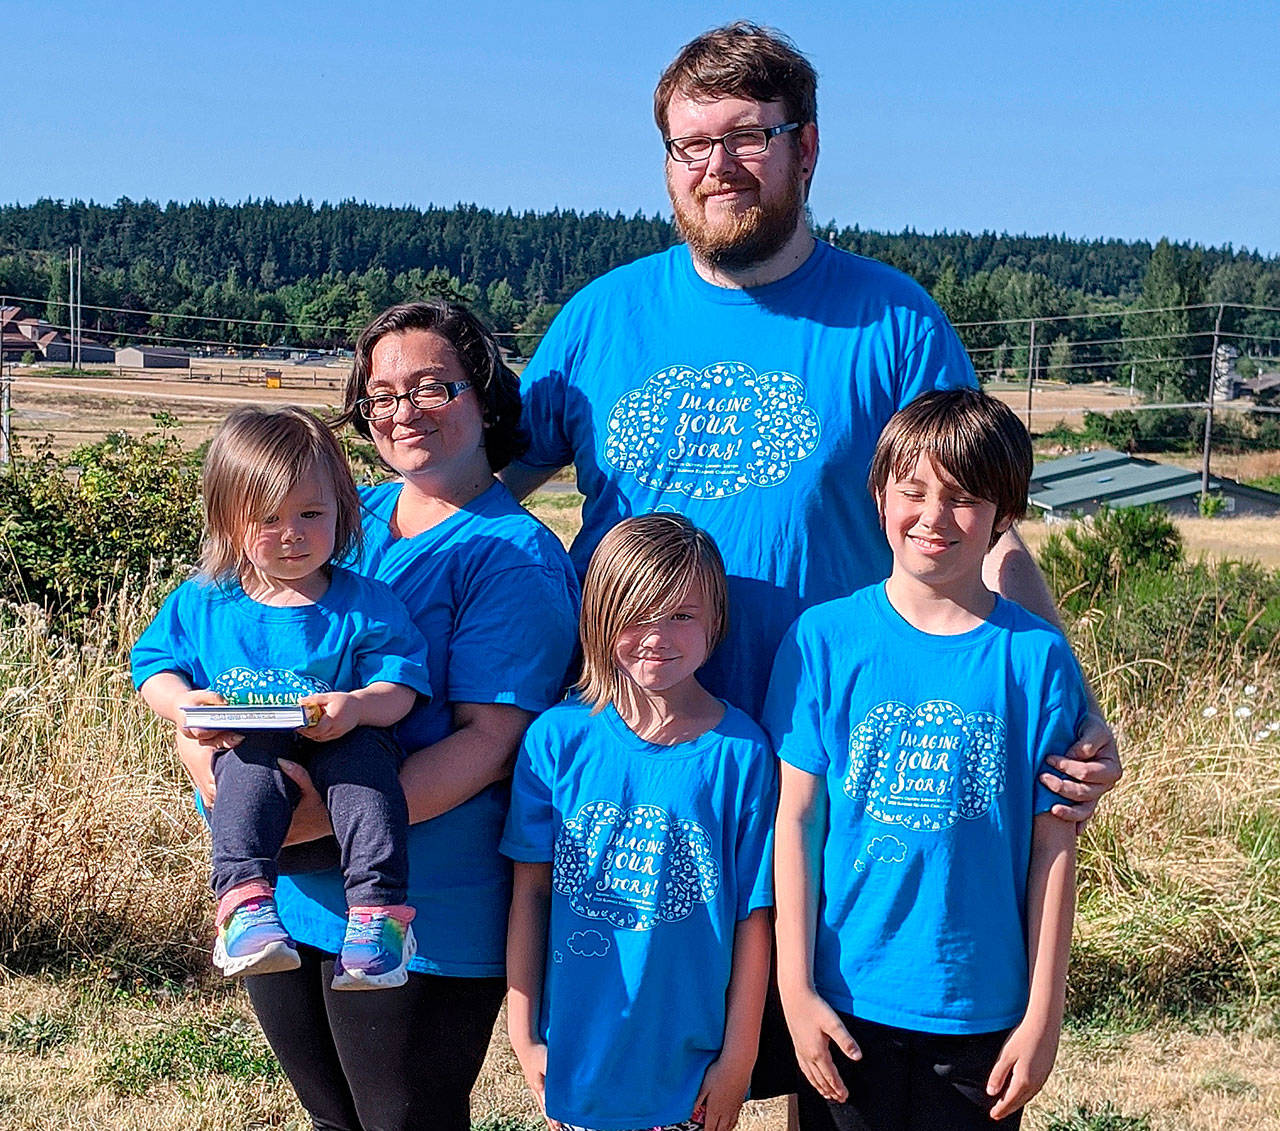 Sequim’s Rachel Anderson, pictured here with her family, looks to earn her associate’s degree in business administration at the end of winter quarter 2021 at Peninsula College. Photo courtesy of Peninsula College